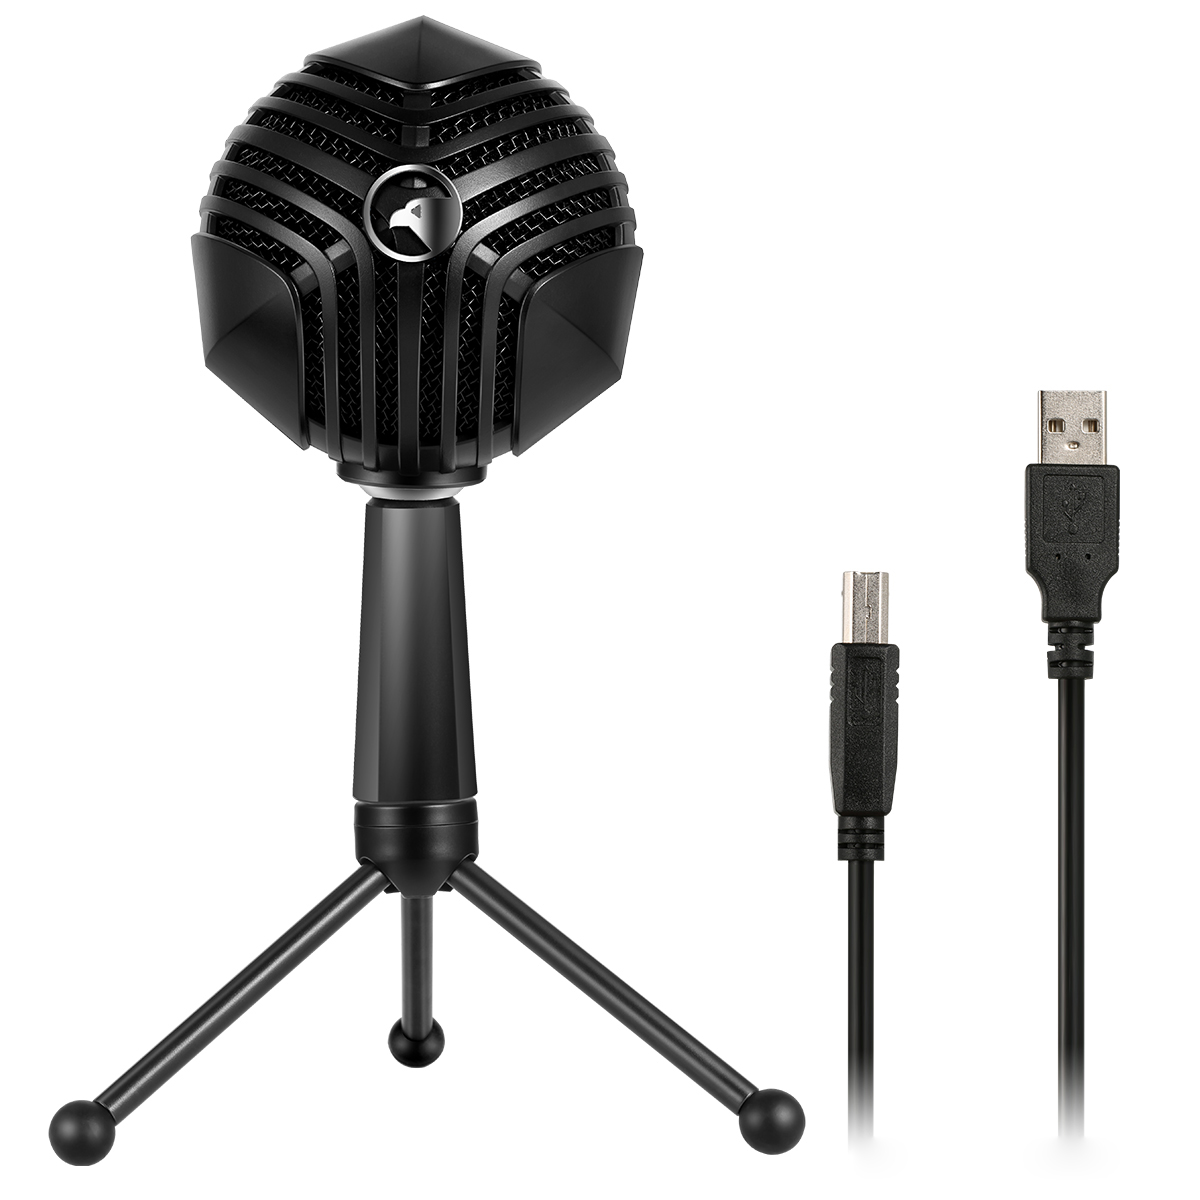 

Yanmai GM-888 USB Wired Cardioid Condenser Microphone with Tripod